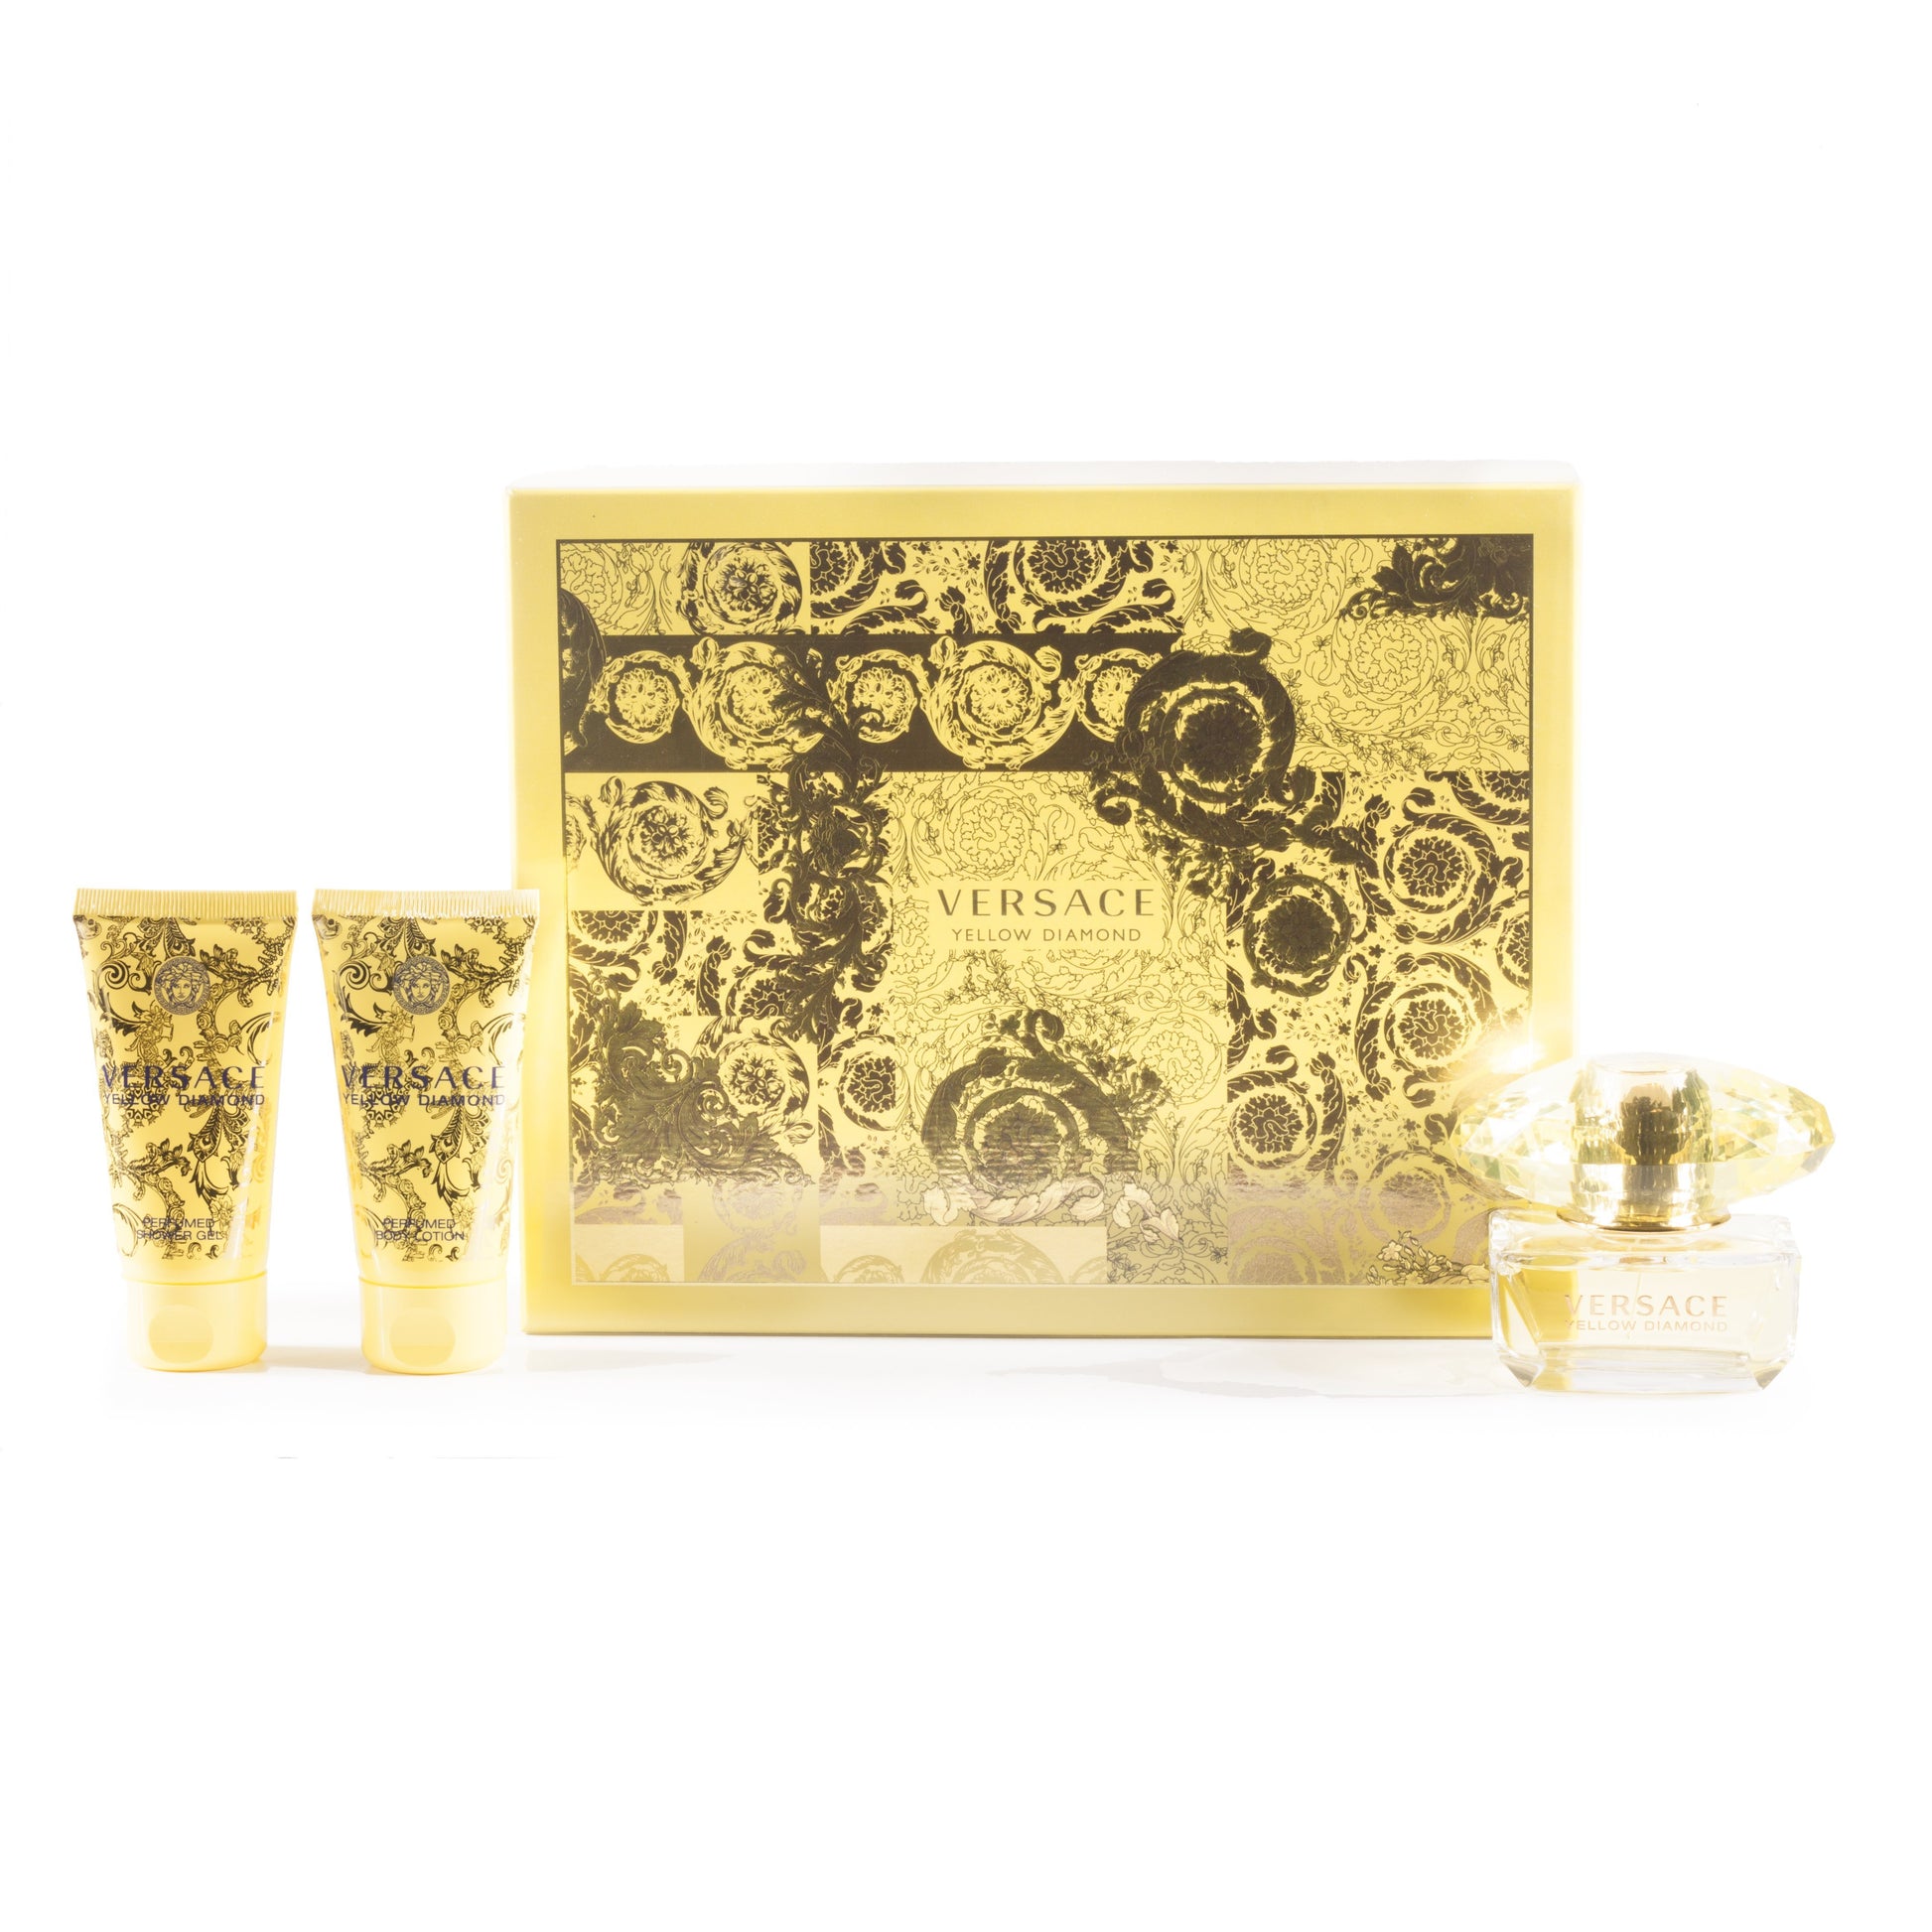 Yellow Diamond Gift Set Eau de Toilette, Body Lotion and Shower Gel for Women by Versace 1.7 oz. Click to open in modal